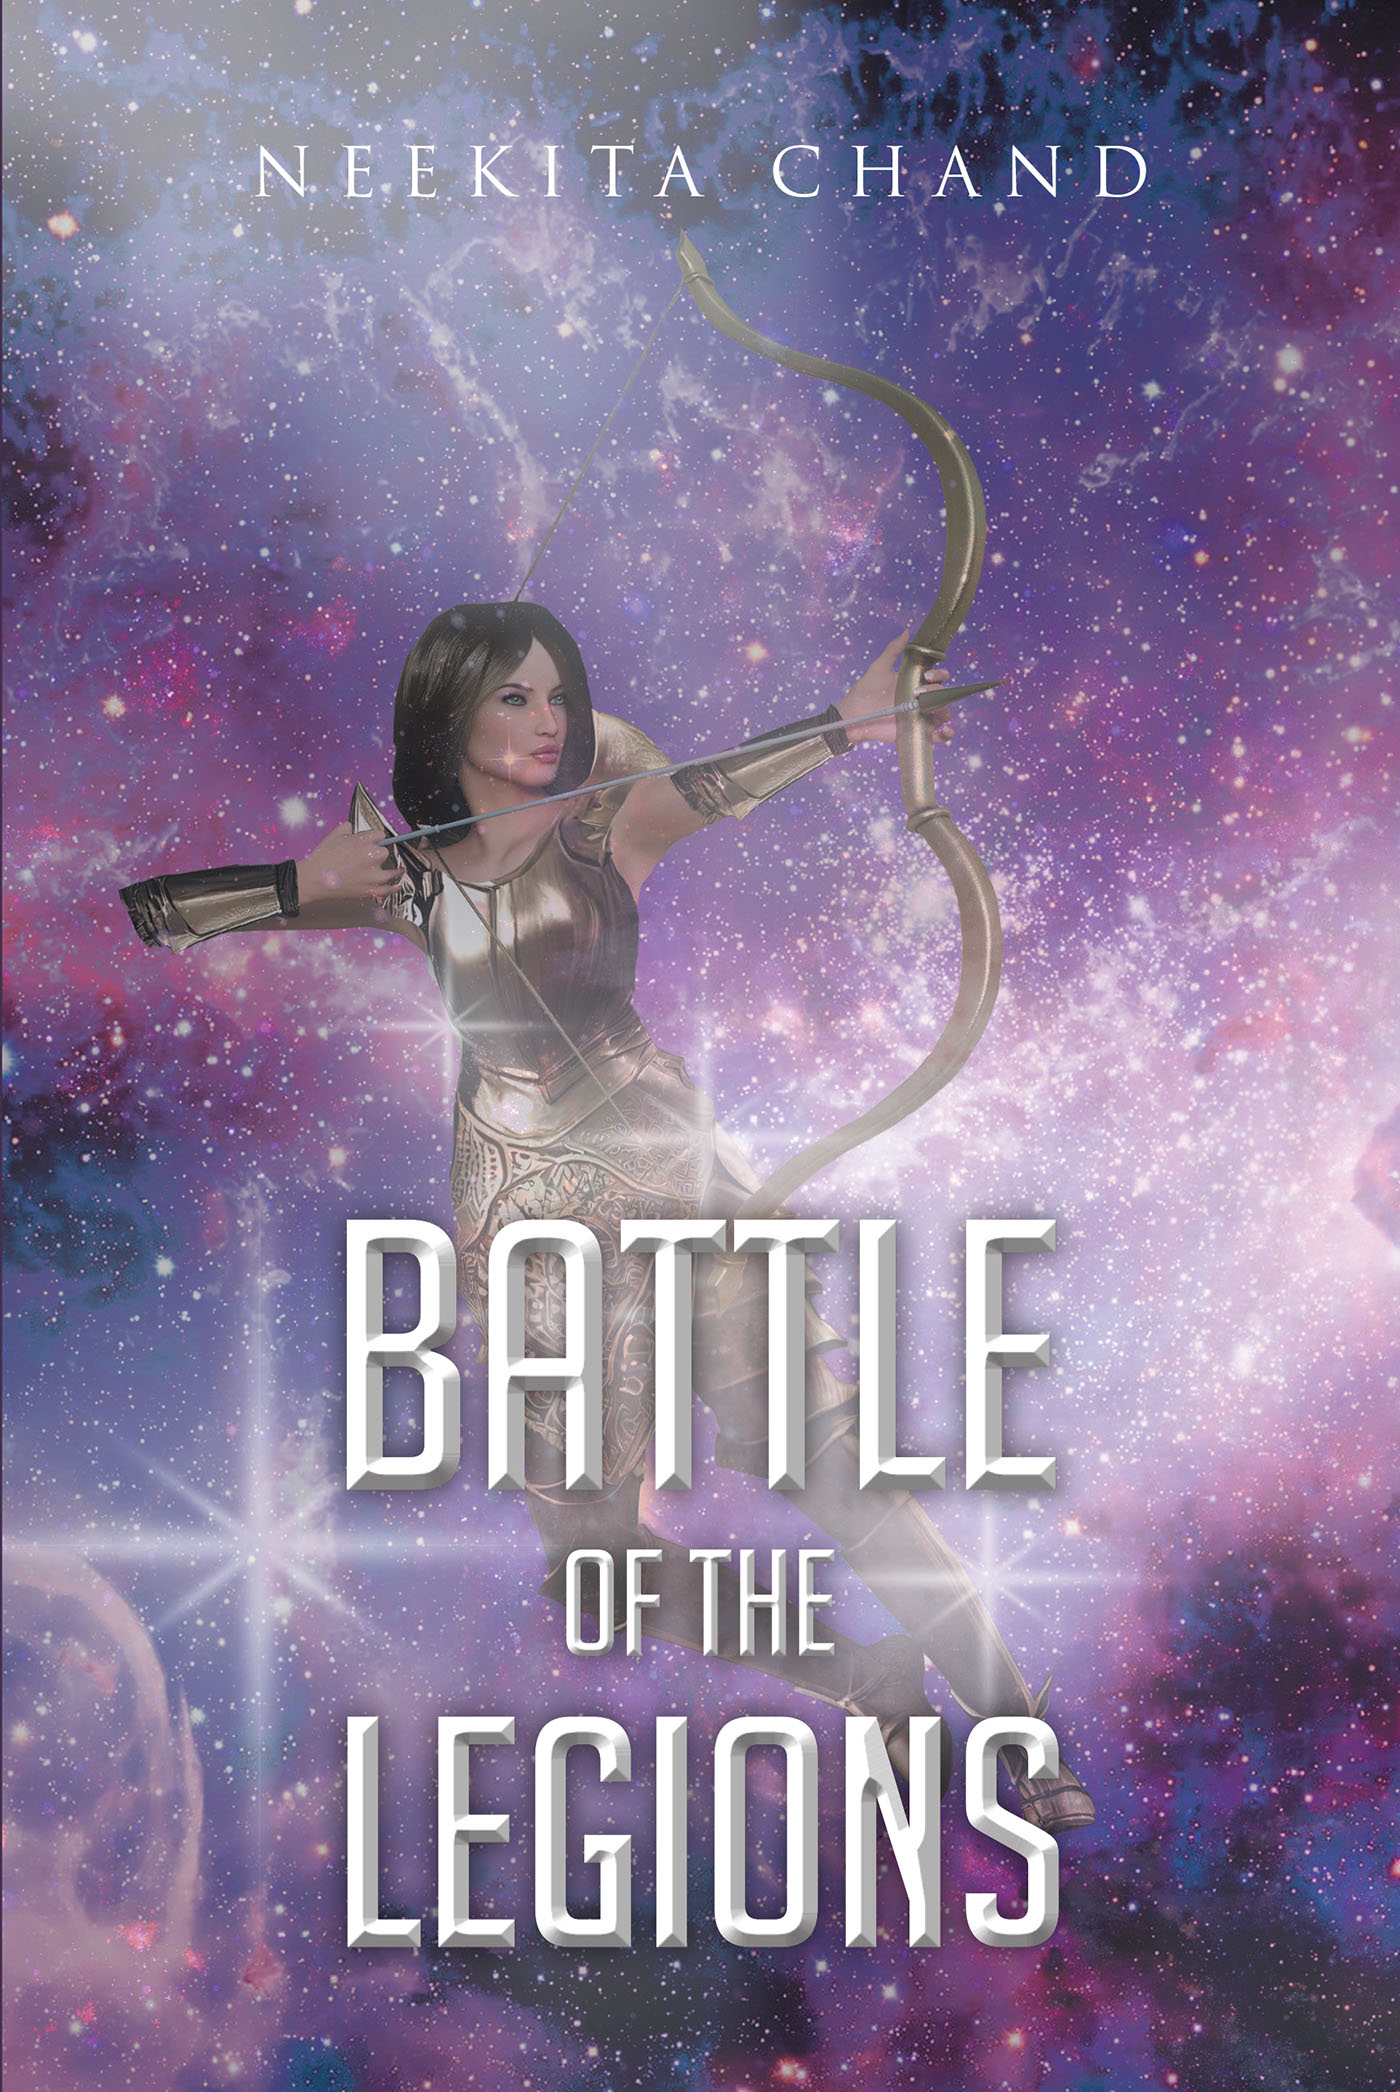 Neekita Chand’s Newly Released “BATTLE OF THE LEGIONS” is an Imaginative Adventure of Angels and Demons on the Frontlines of the Last Days